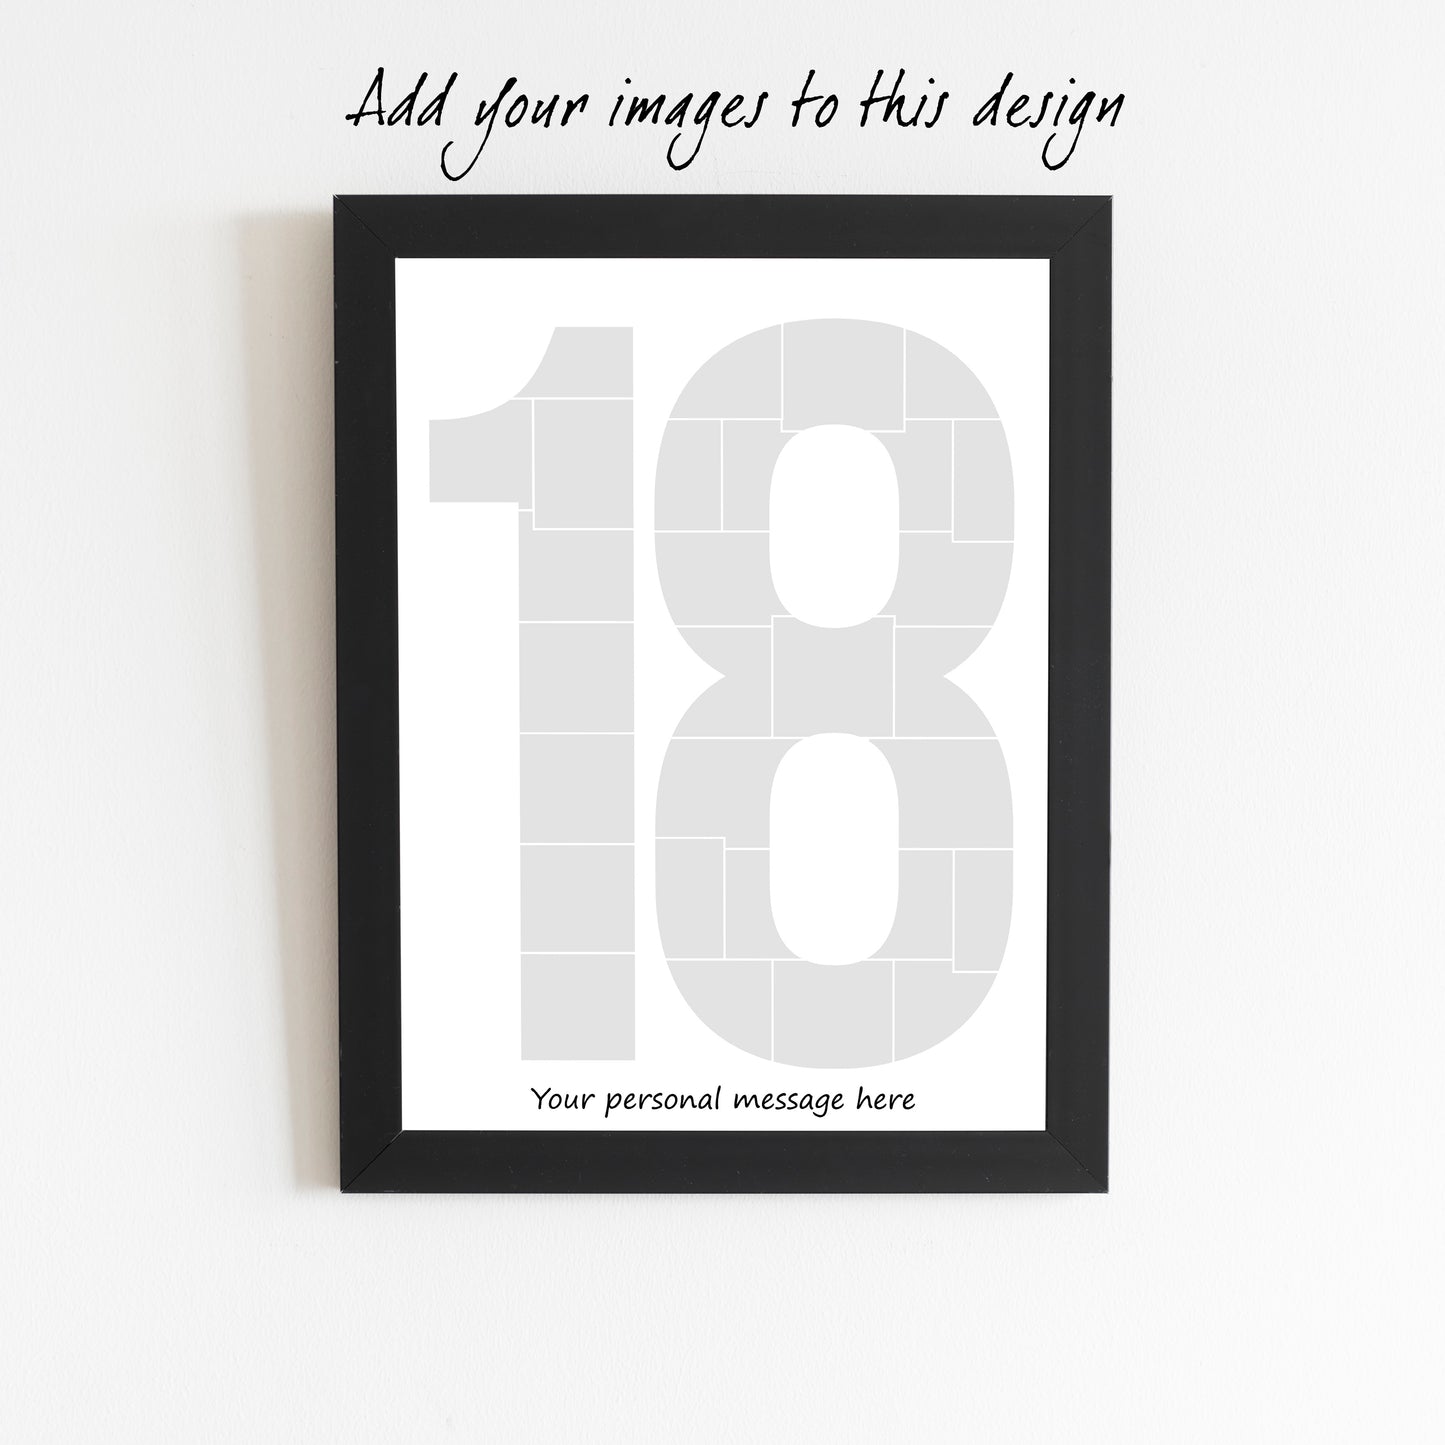 18th Birthday Print, Personalised Photo Collage, Family Print, Landmark Birthday Print, Framed Print, Birthday Gift idea